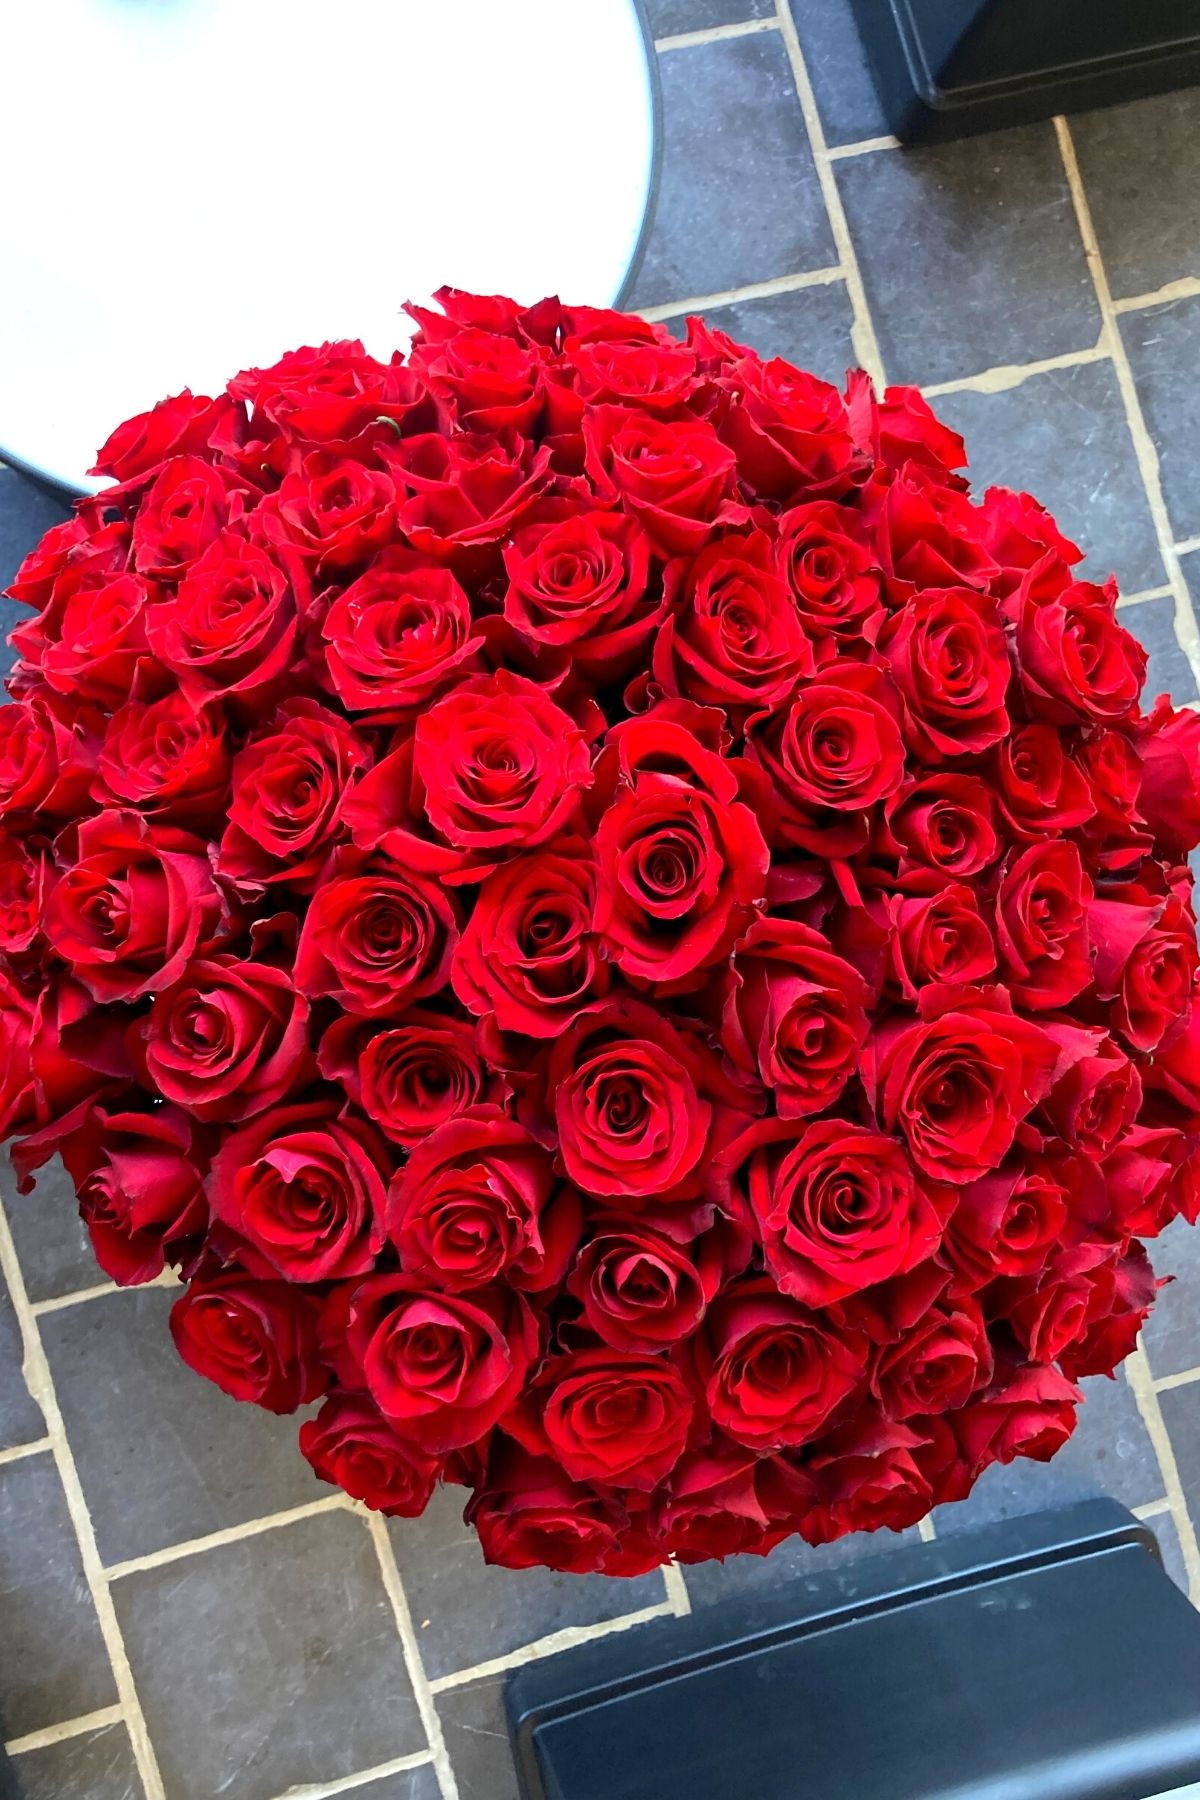 Perfect Petals of Ever Red Roses - Blog on Thursd (18)